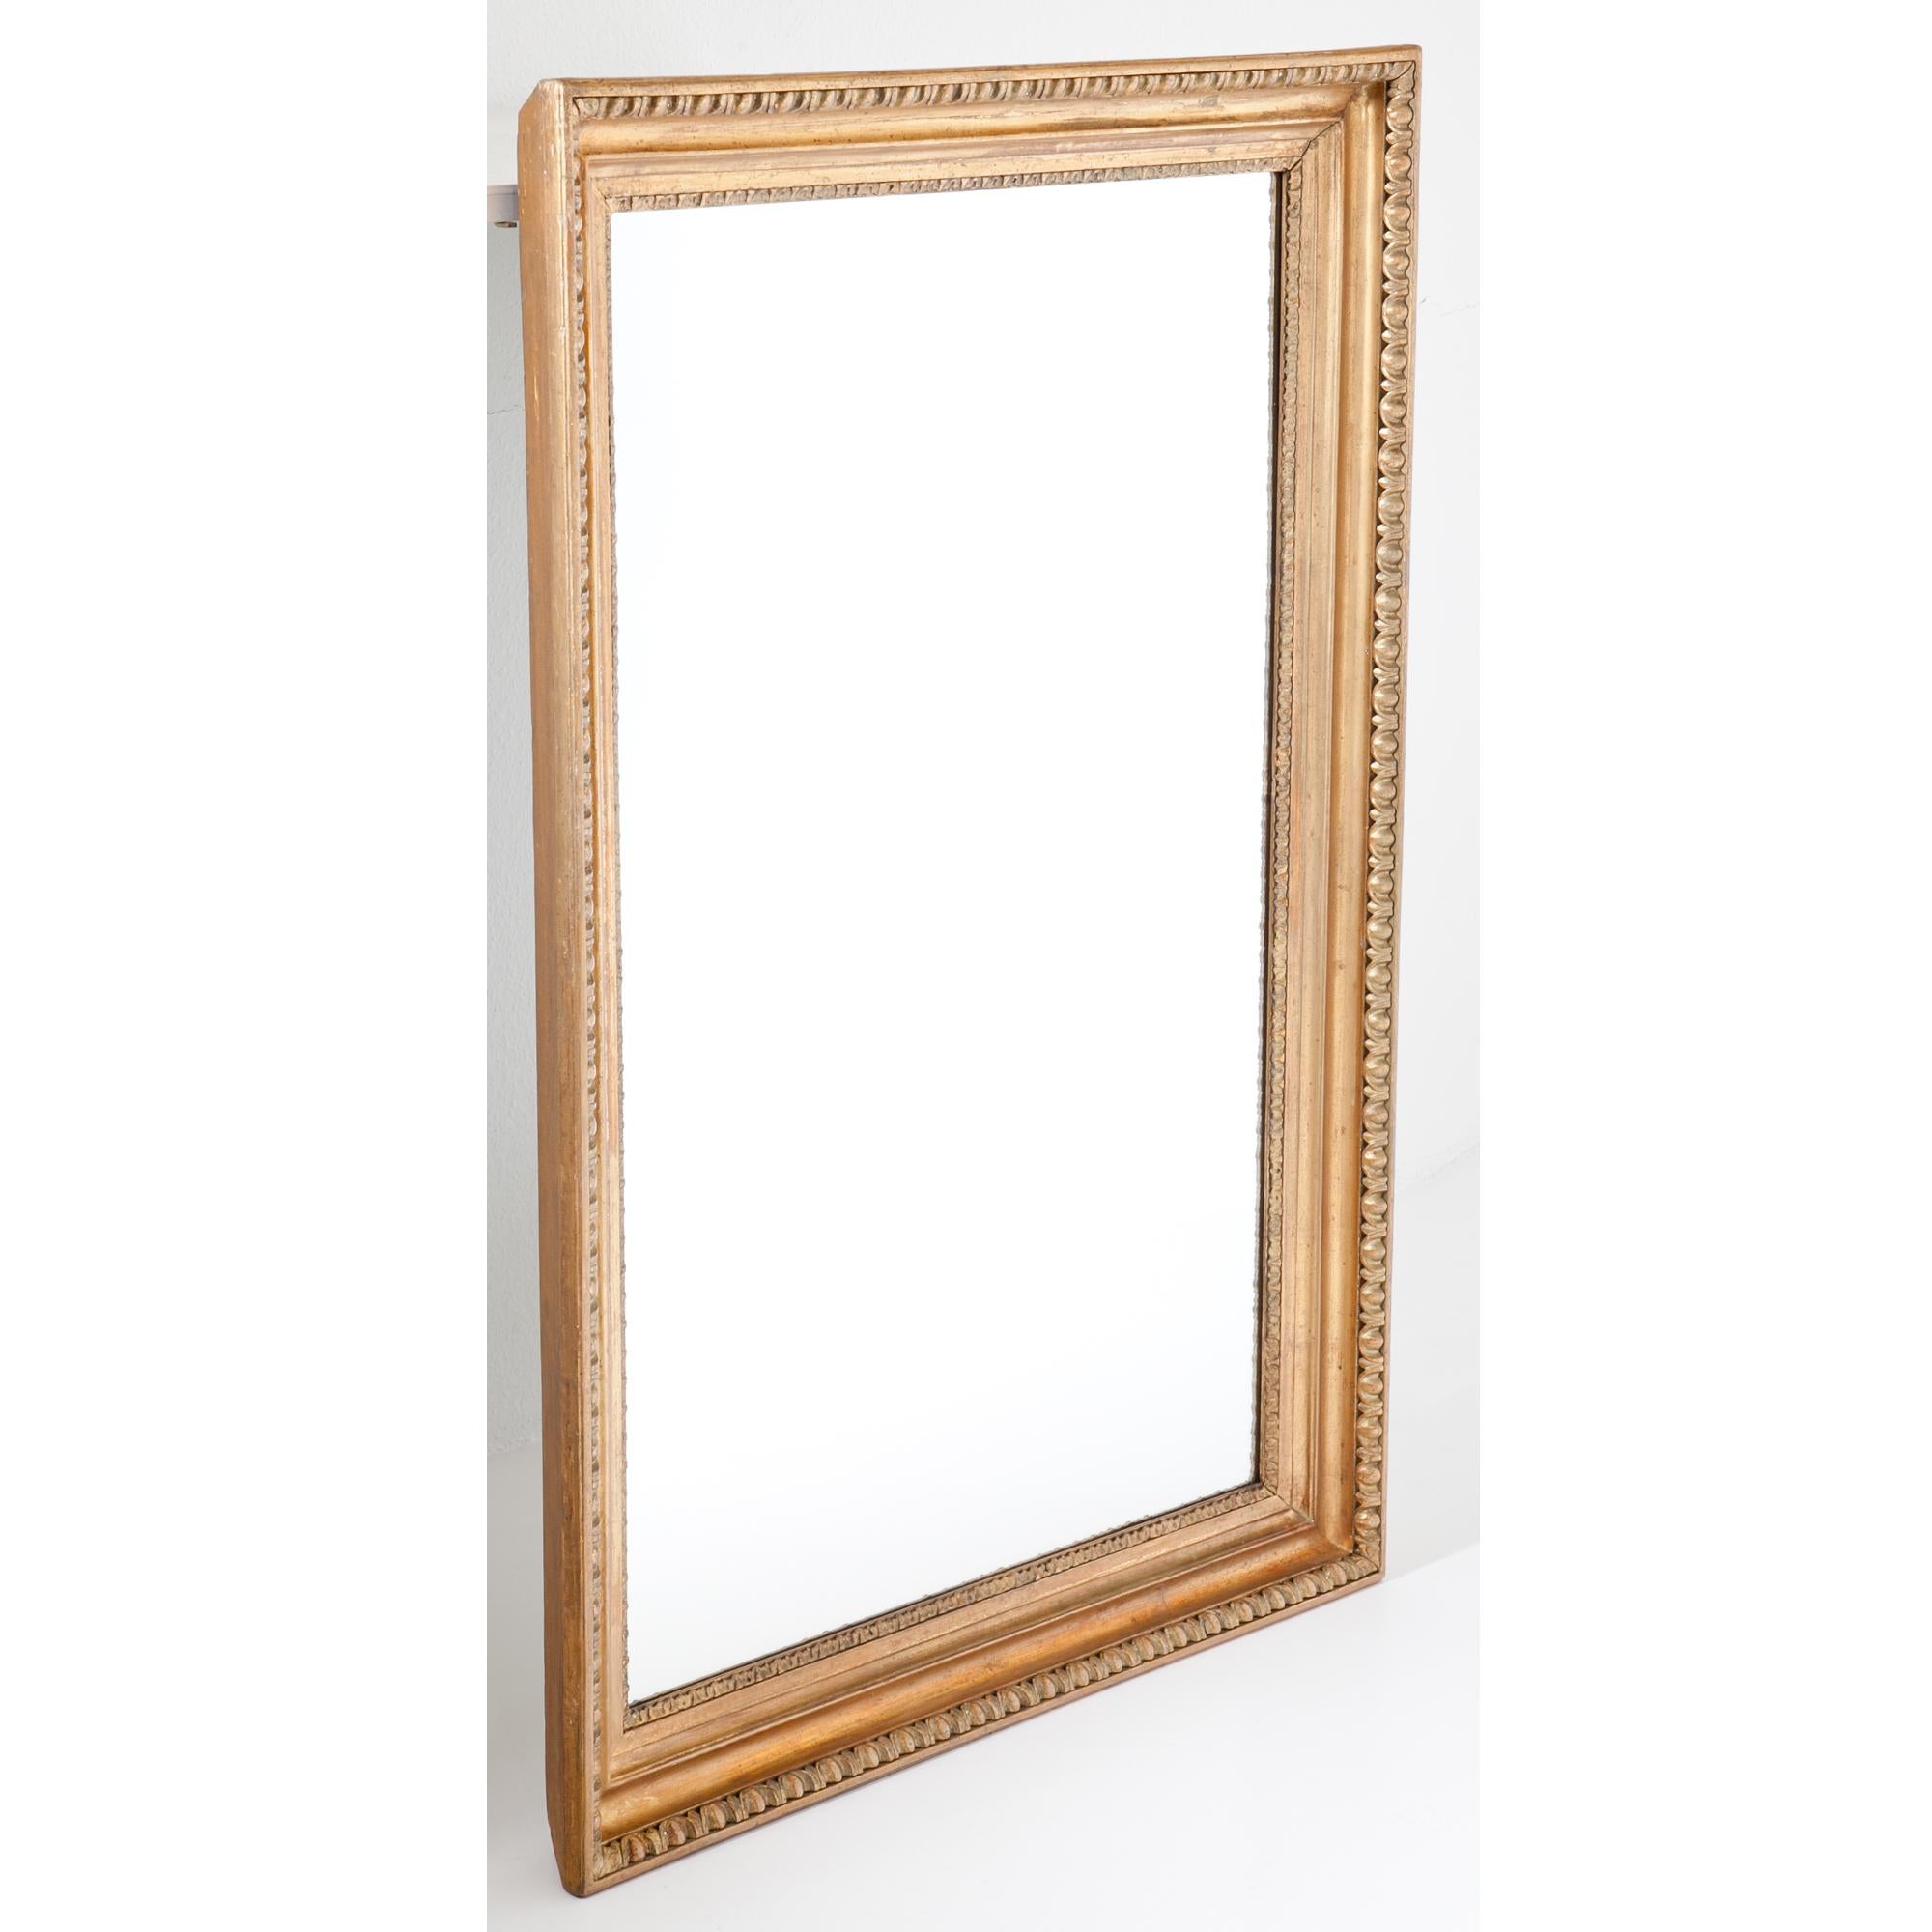 Large wall mirror with a profiled giltwood frame with cymatium molding. The mirror pane is new. Inside Dimensions: 102 x 62 cm.